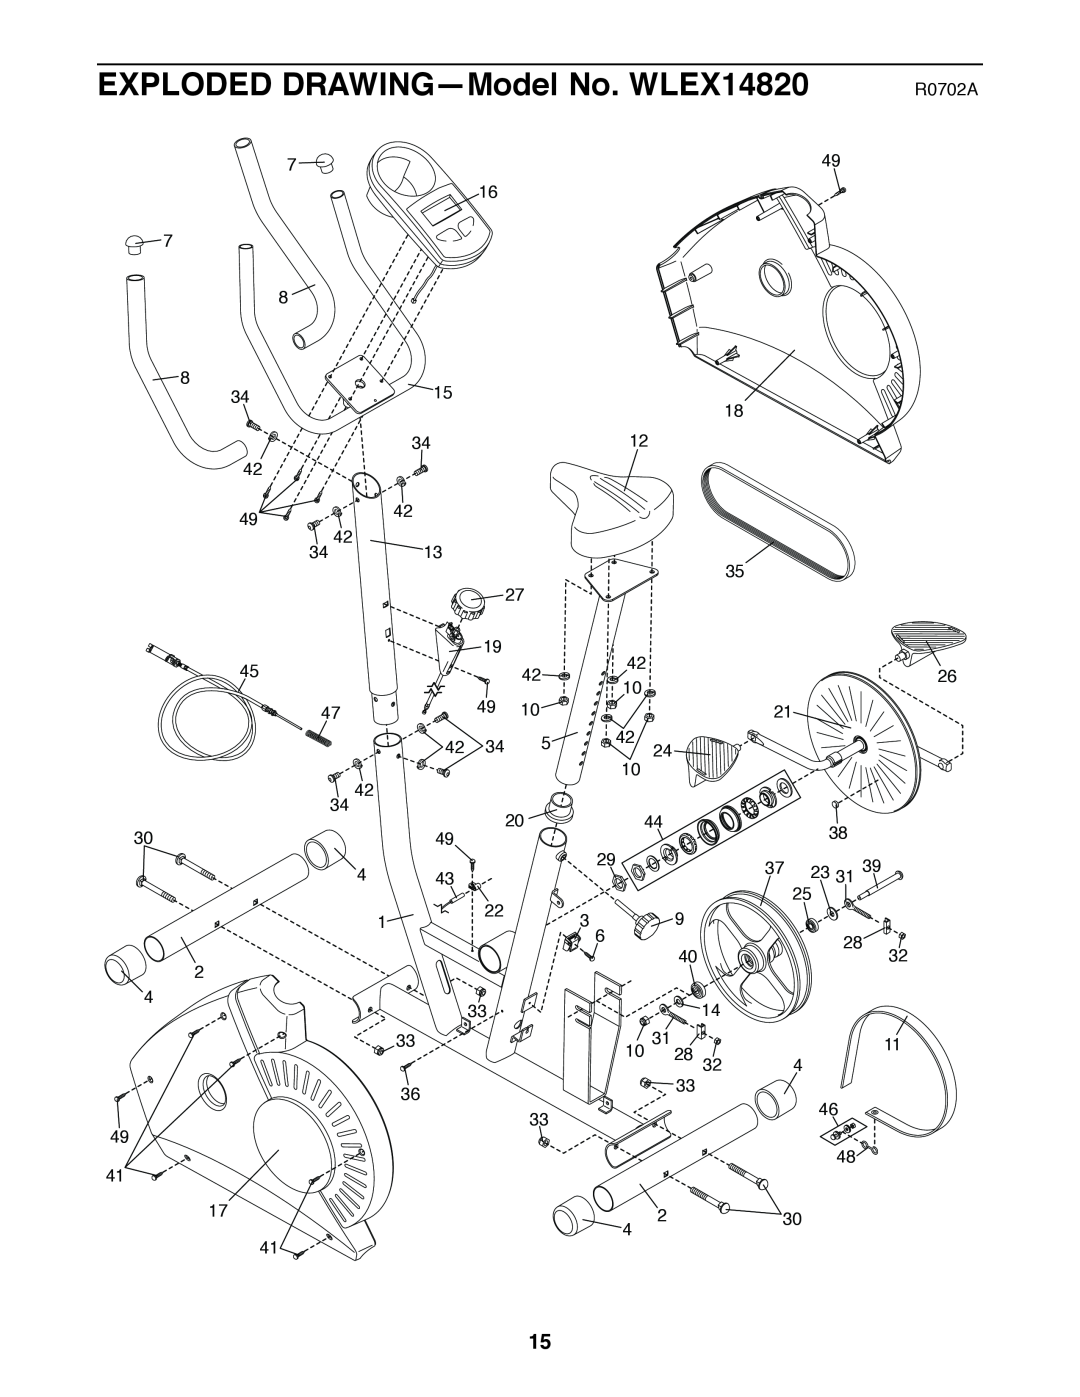 Weslo user manual R0702A, EXPLODED DRAWING-Model No. WLEX14820 